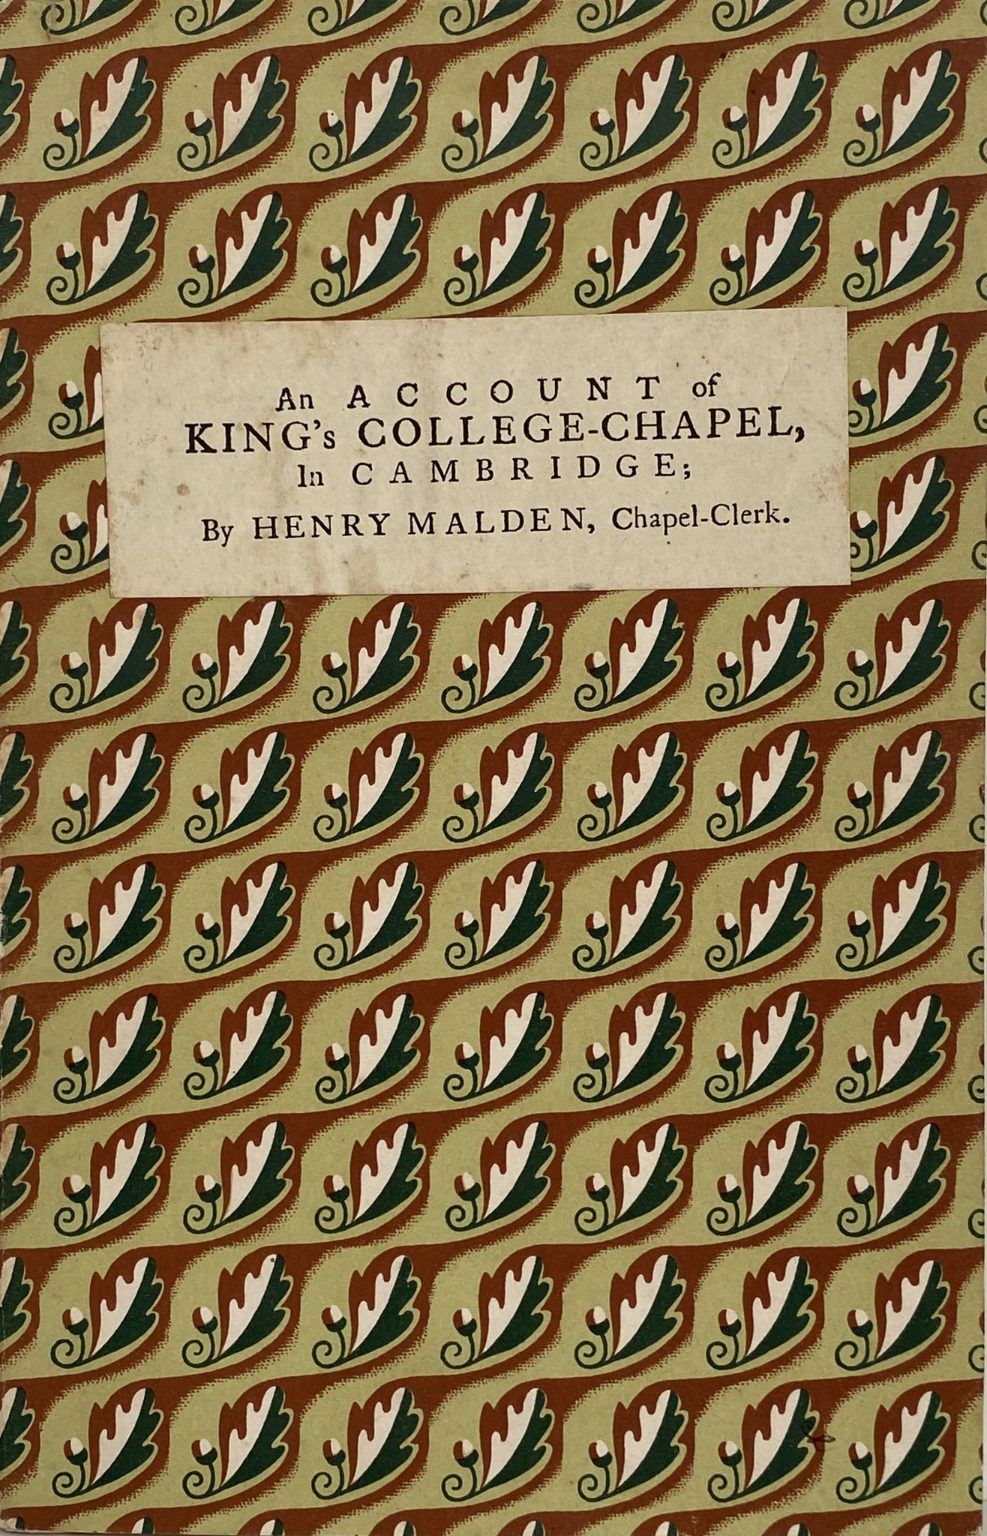 KING'S COLLEGE CHAPLE IN CAMBRIDGE: An Account of